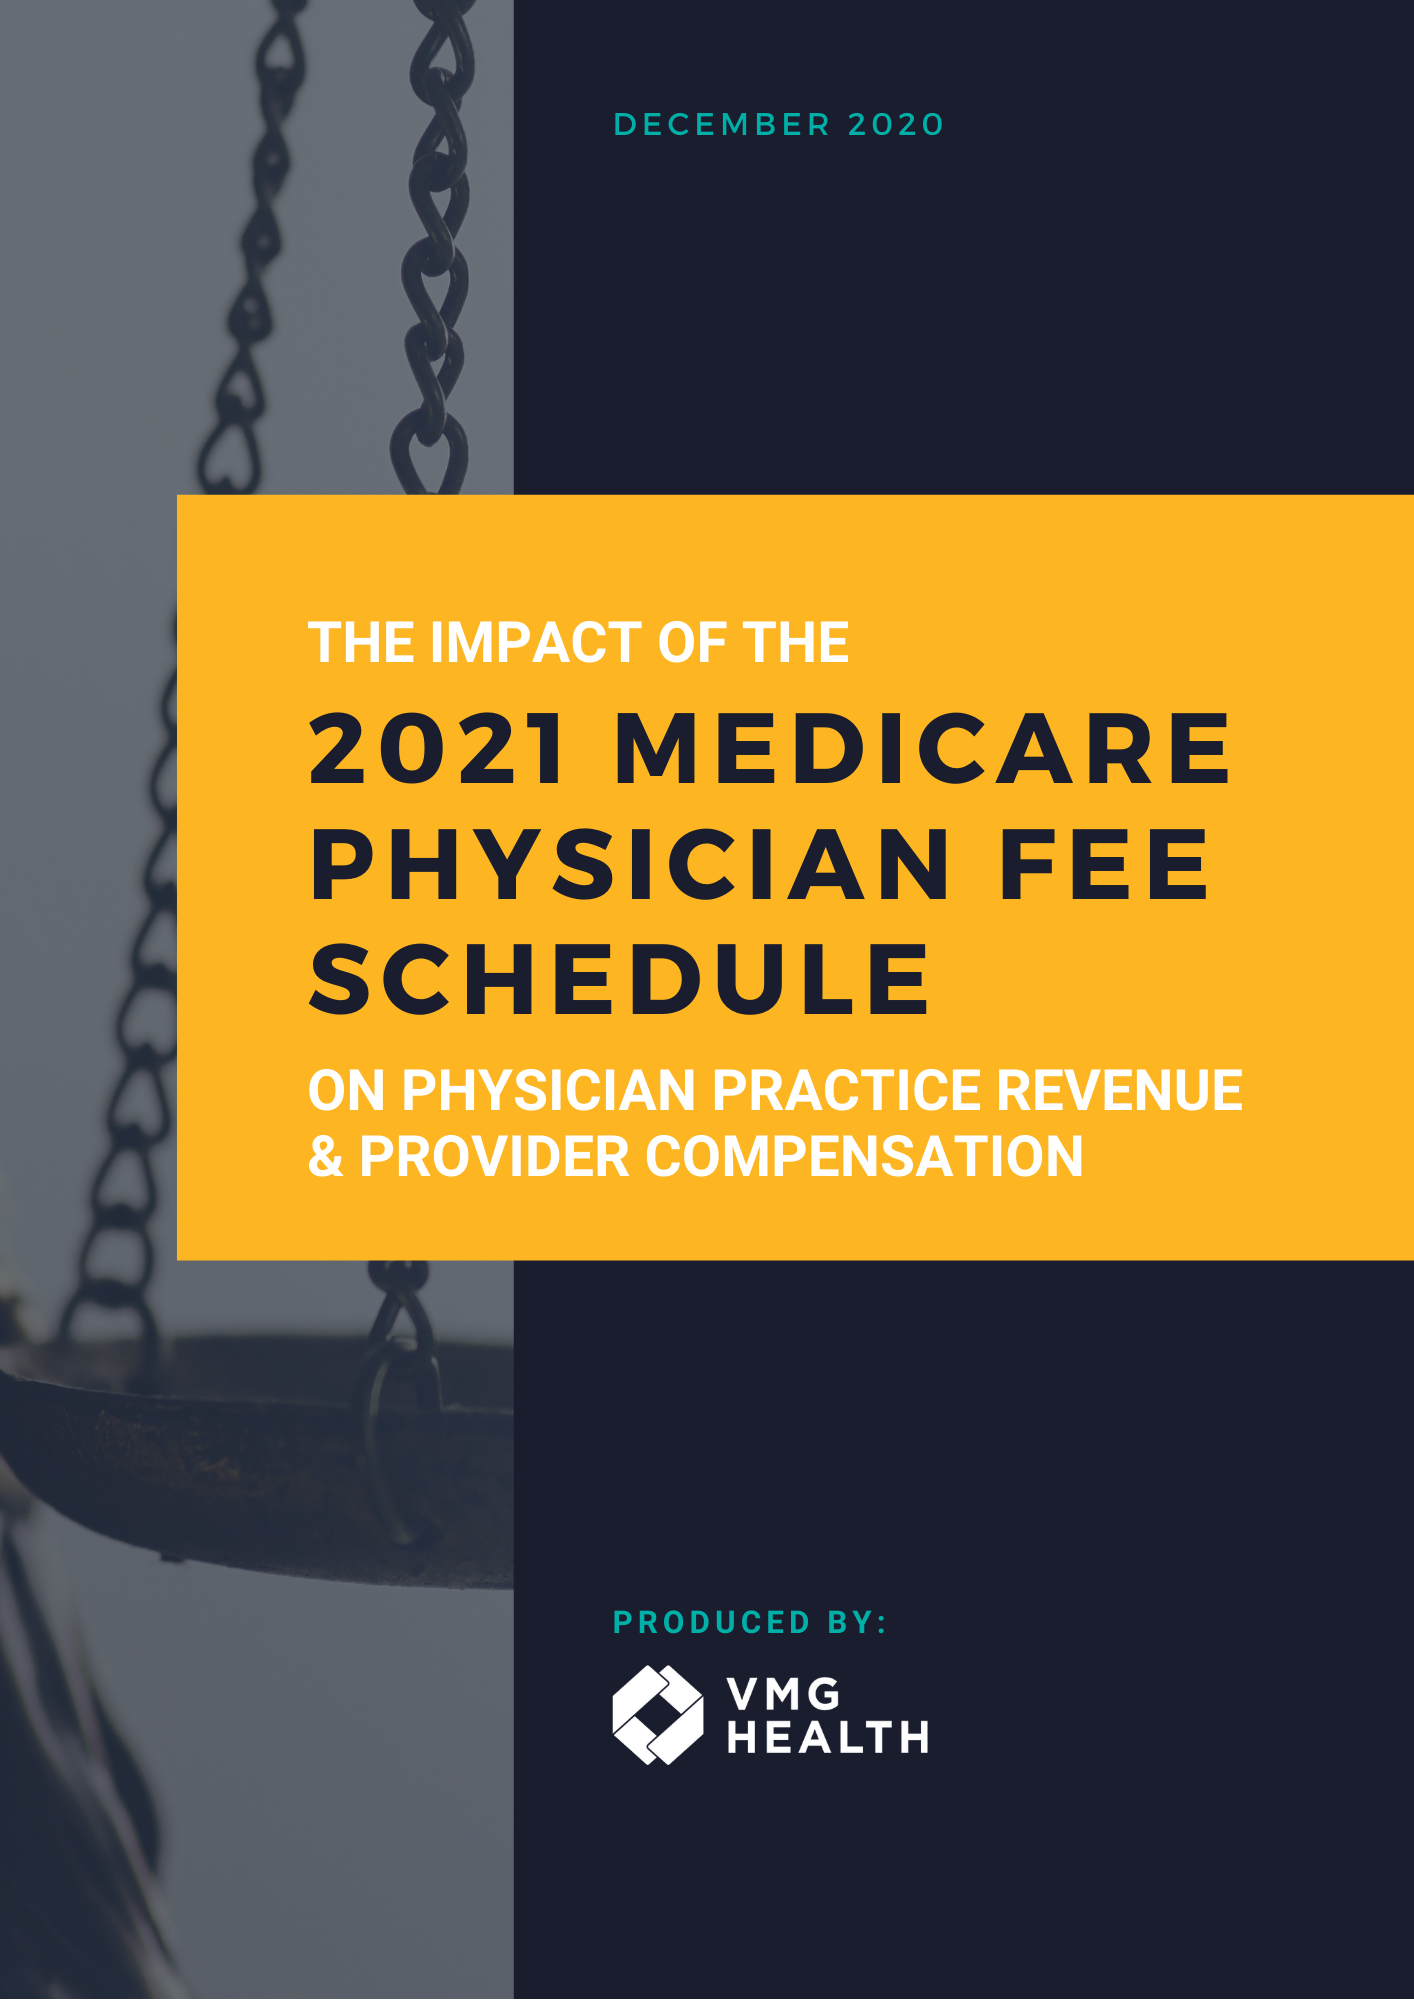 The Impact of the 2021 Medicare Physician Fee Schedule on Physician Practice Revenue and Provider Compensation